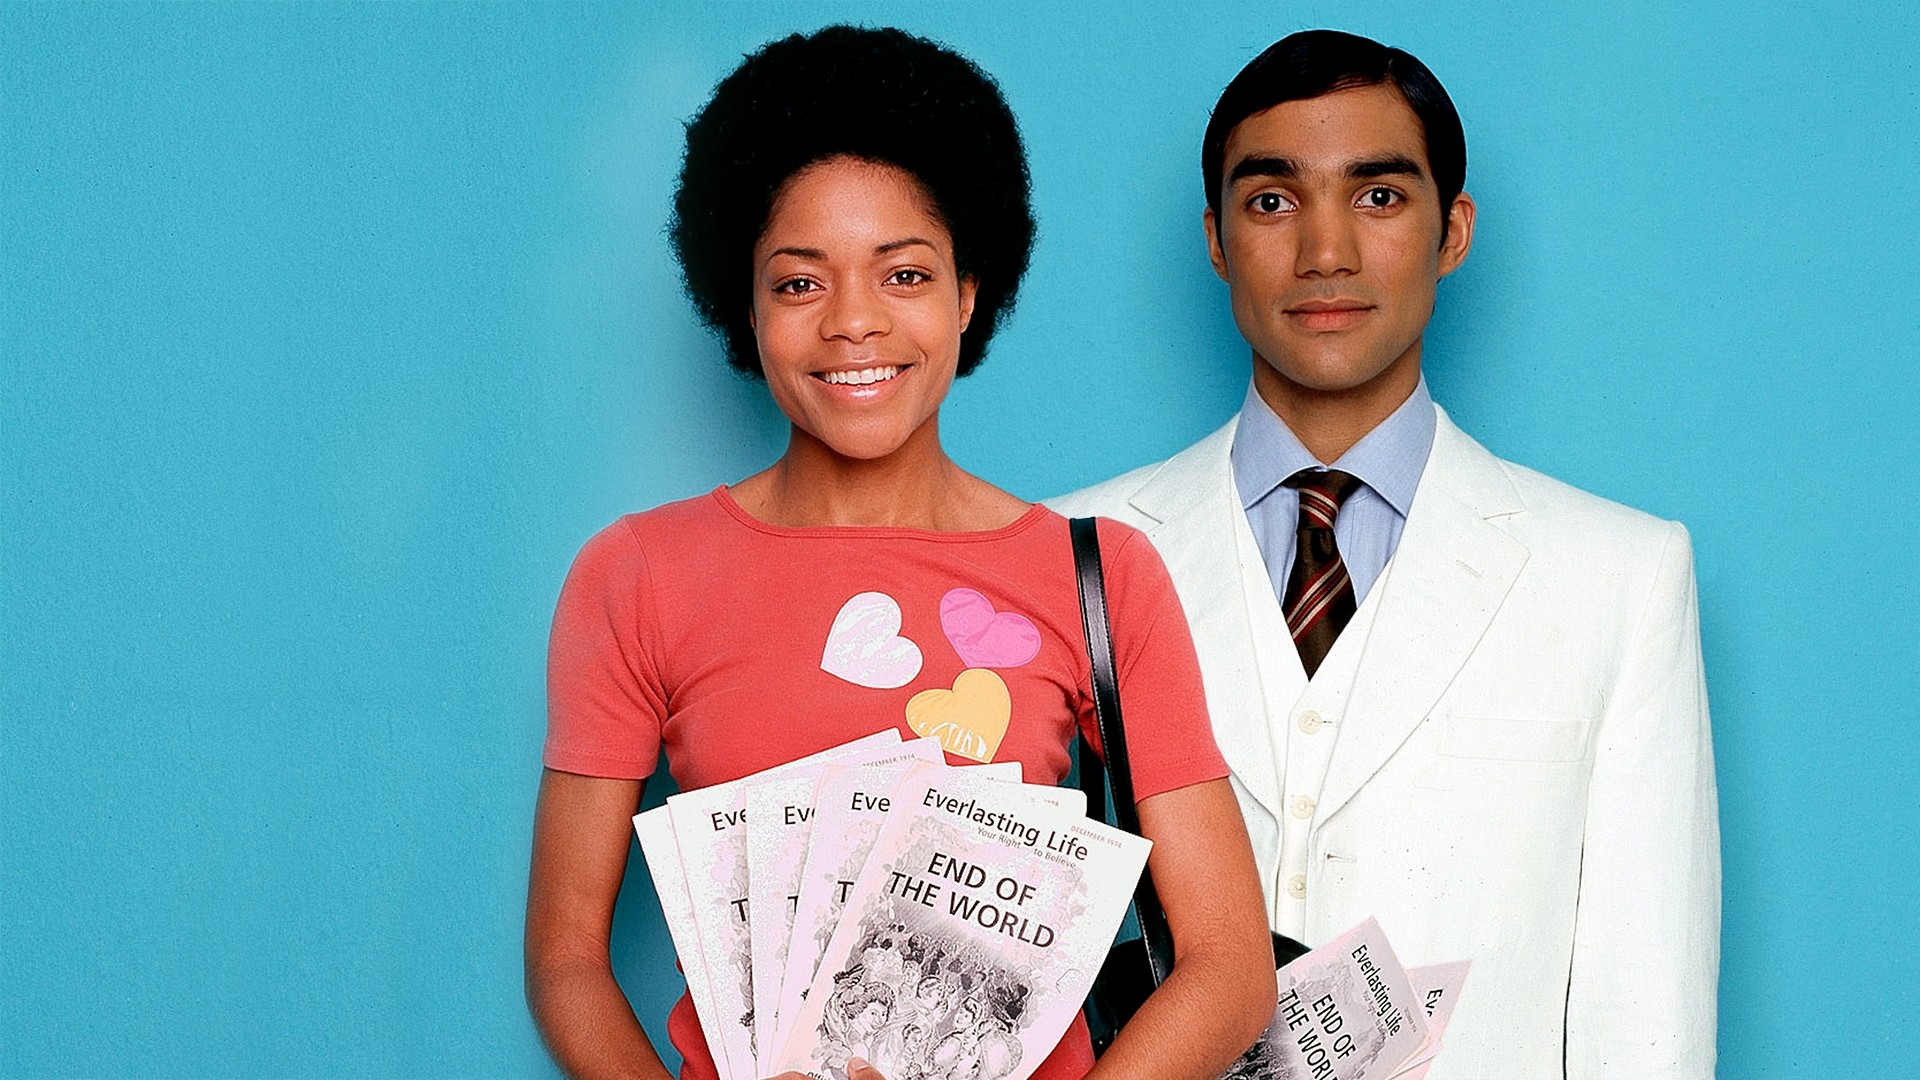 A young black woman smiling at the camera, standing in front of a smarly dressed Asian man who looks very uncomfortable